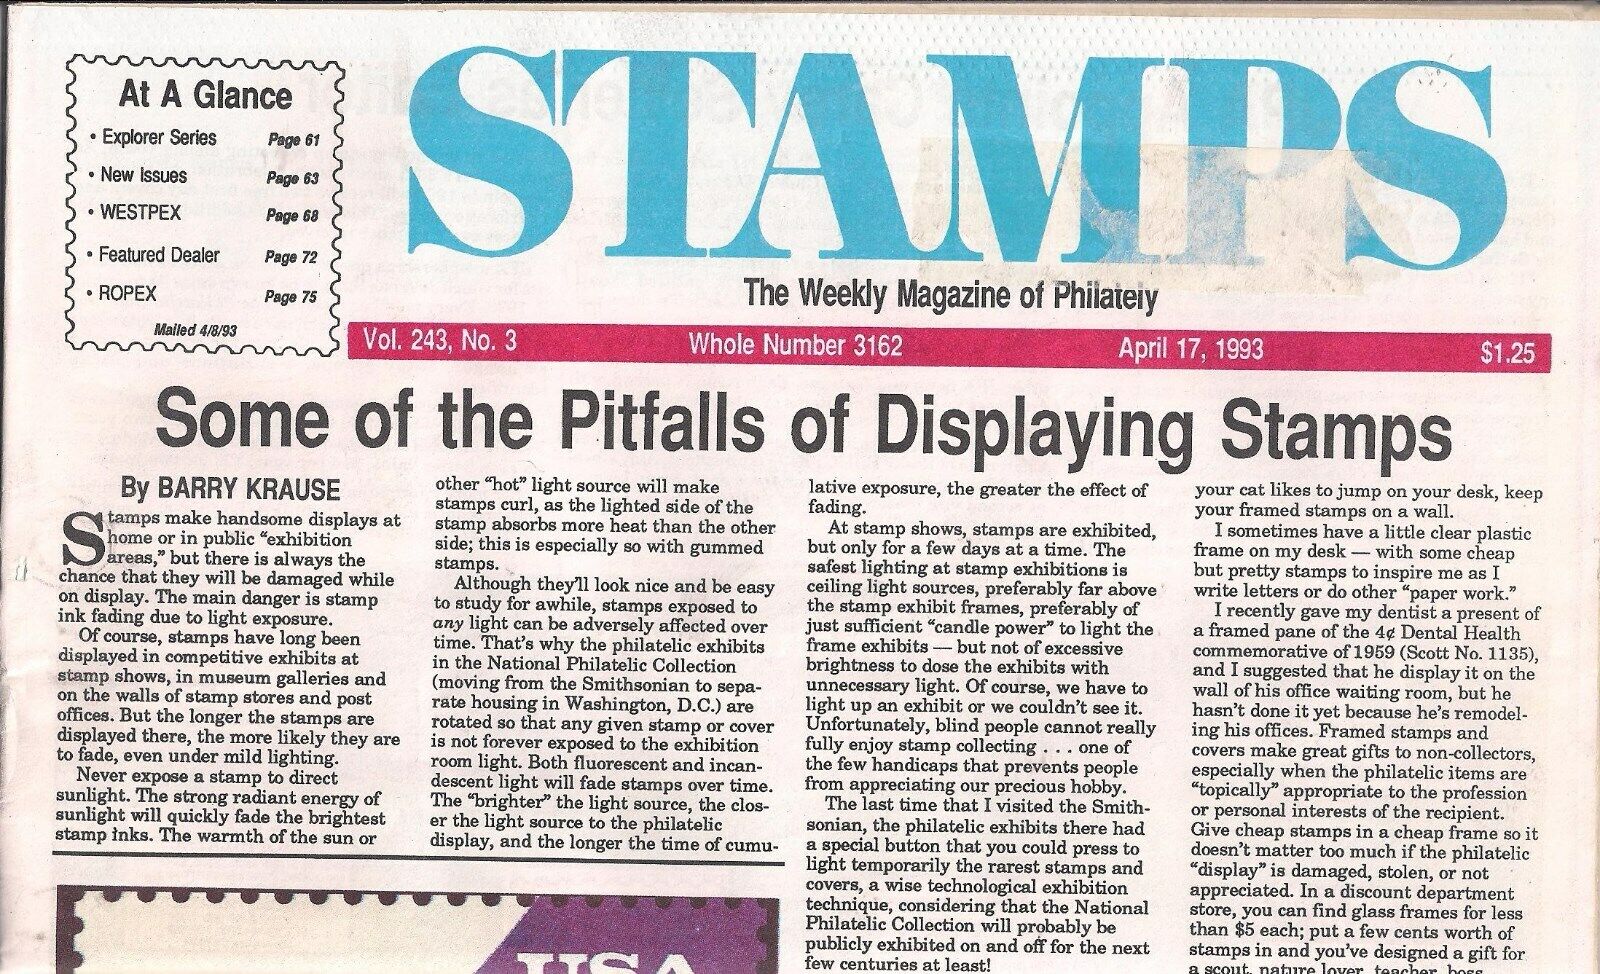 19 STAMPS weekly magazine Chicago Mall newspapers from 1993 All stores are sold